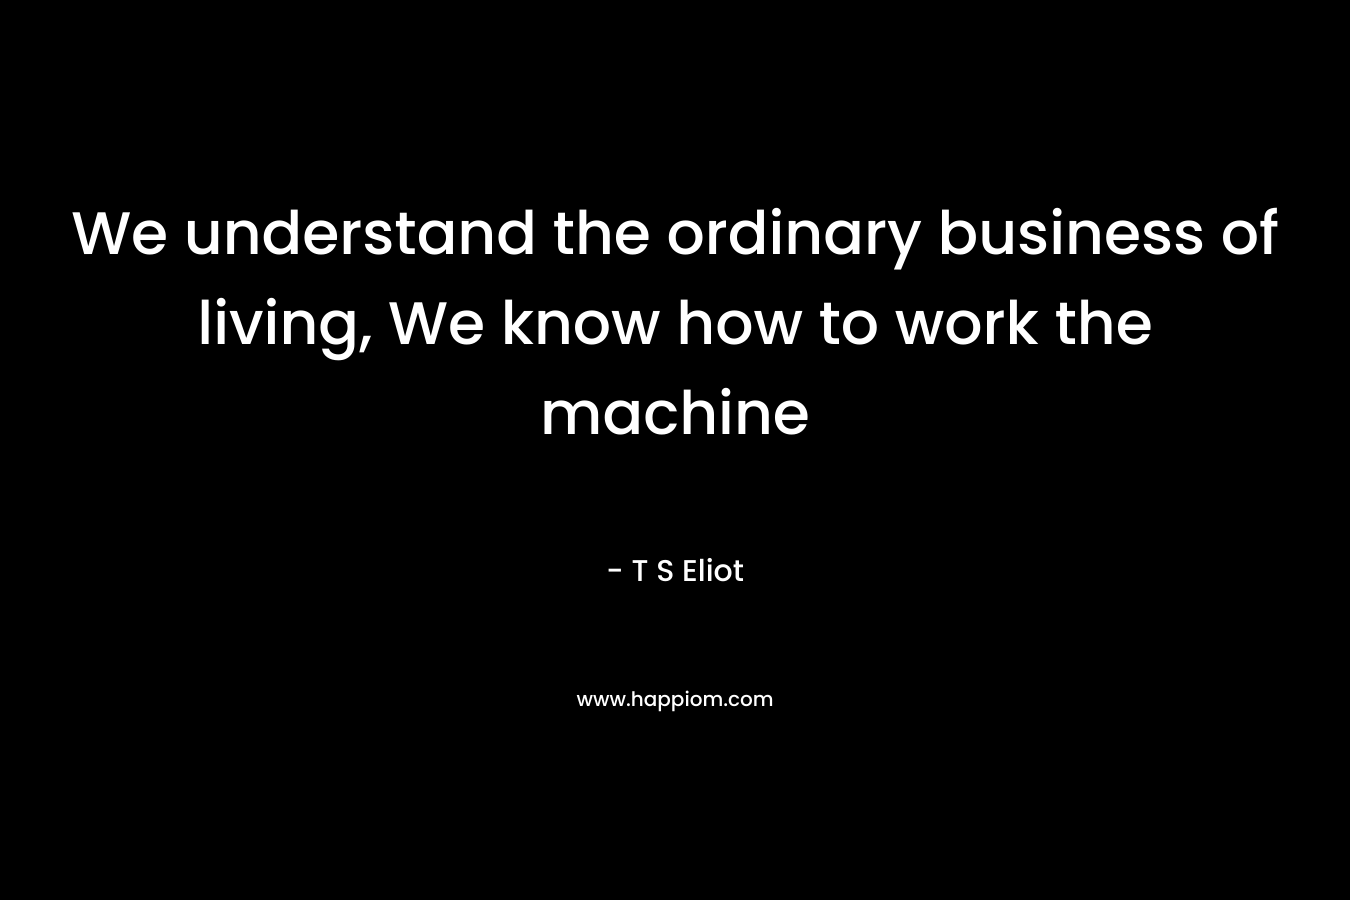 We understand the ordinary business of living, We know how to work the machine